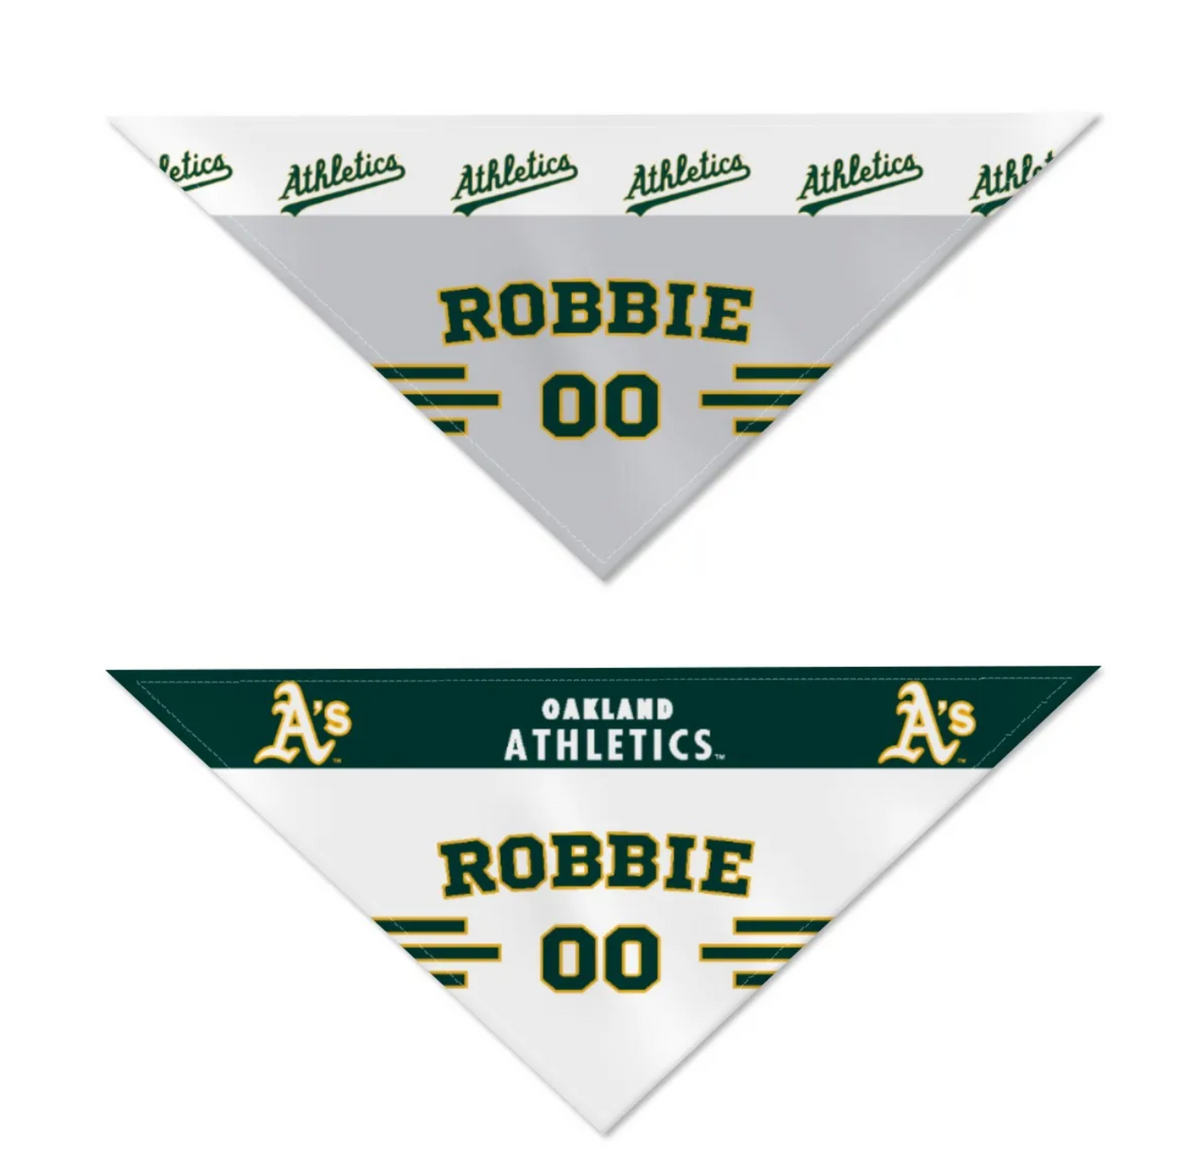 Oakland Athletics Home/Road Personalized Reversible Bandana - 3 Red Rovers